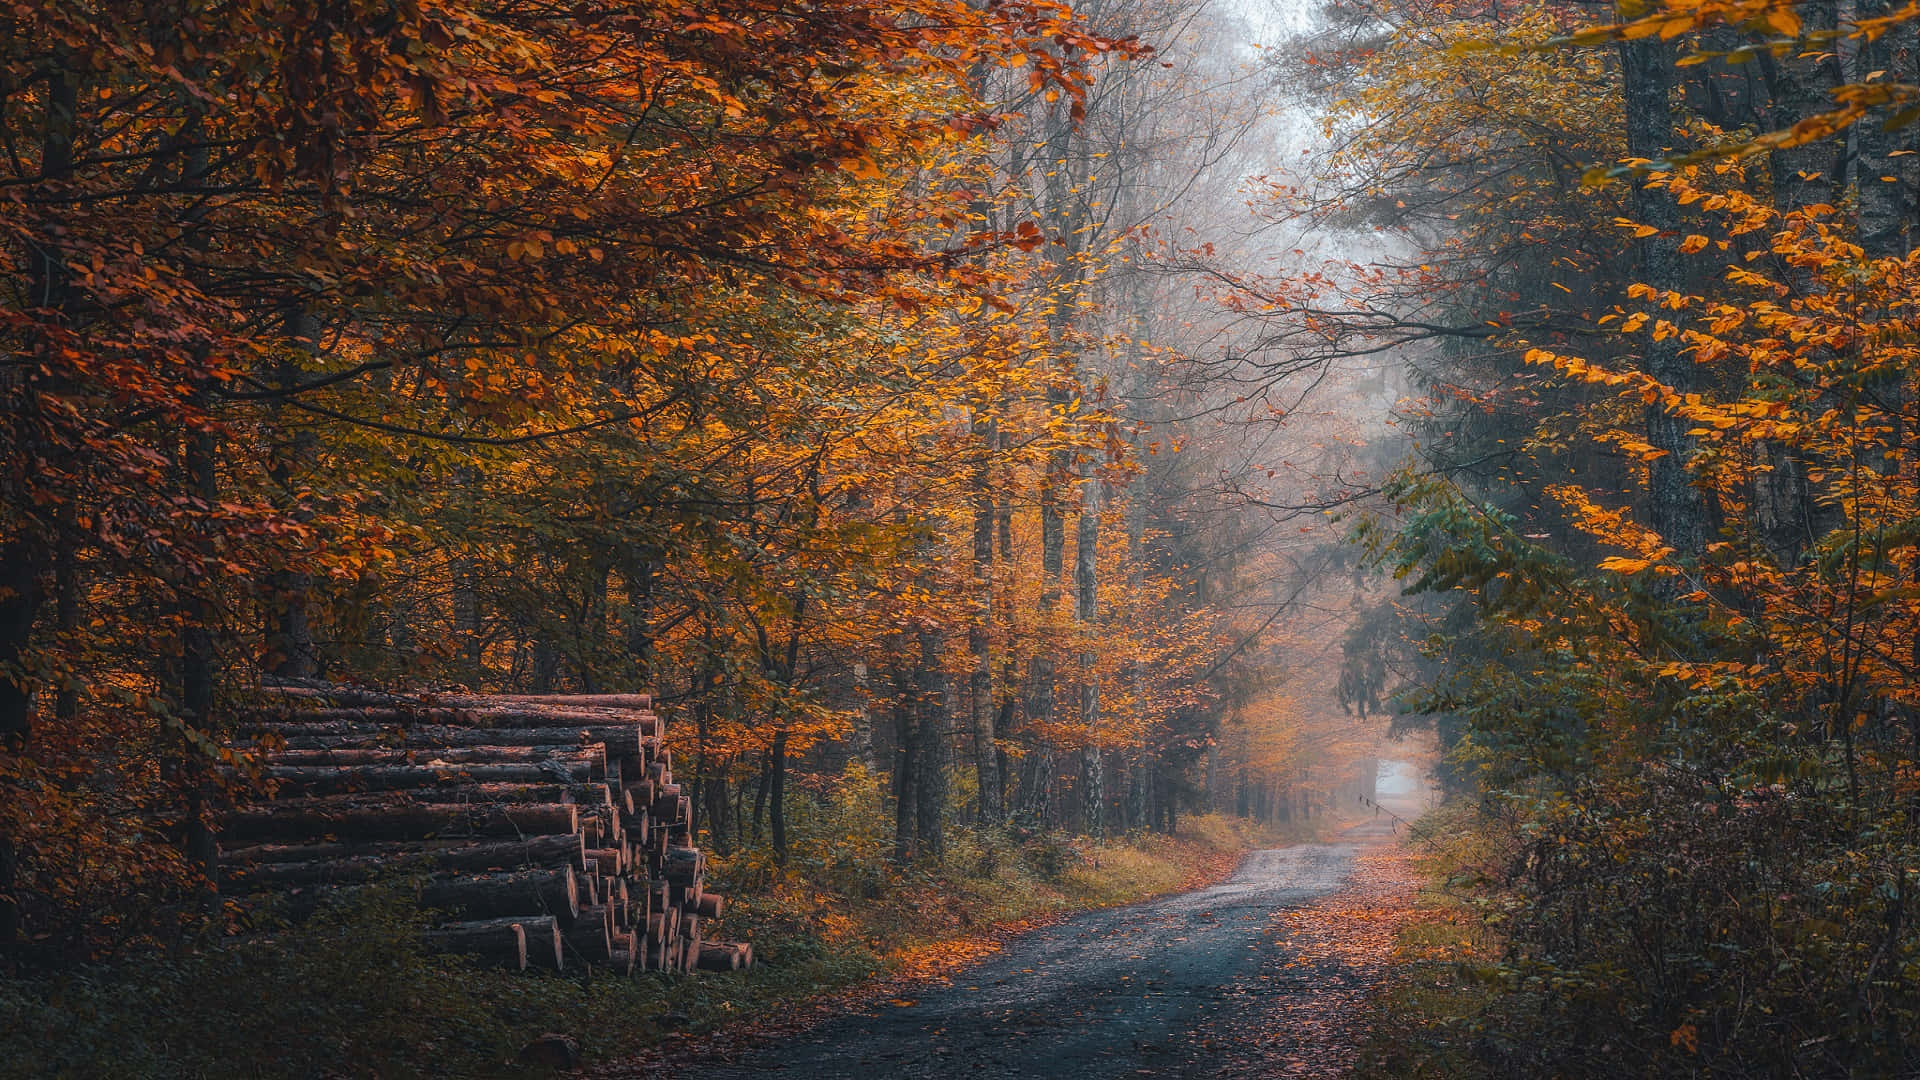 Enchanting Autumn Trail in the Forest Wallpaper